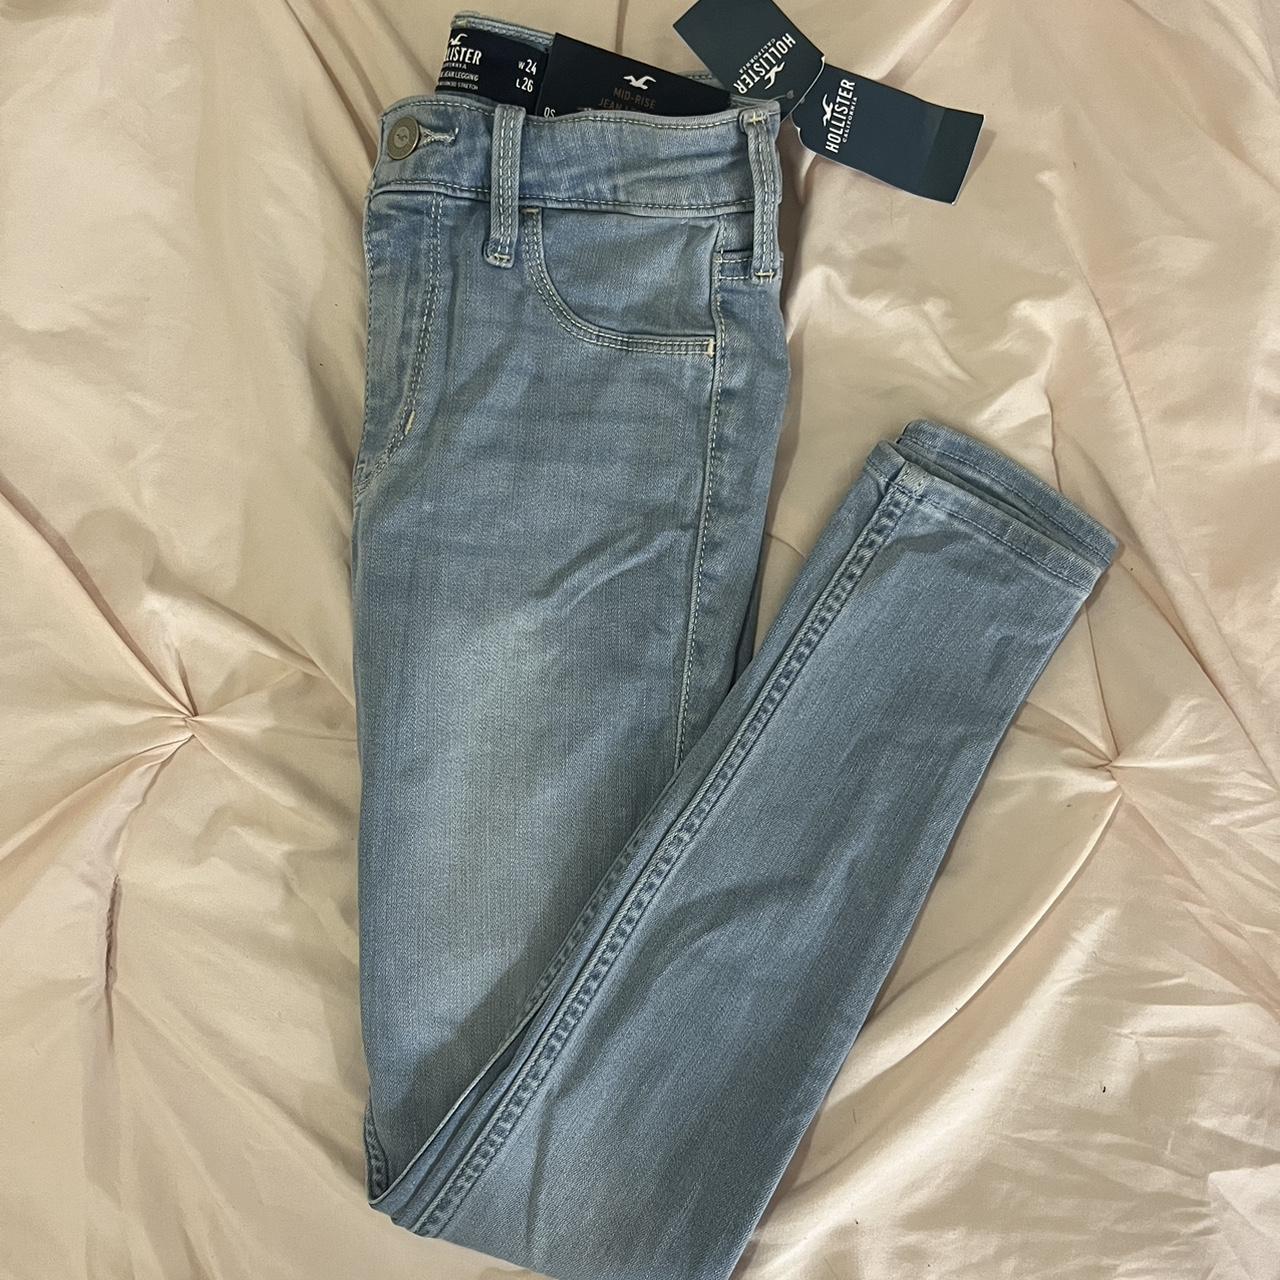 hollister mid rise jean jeggings , size 0S, never